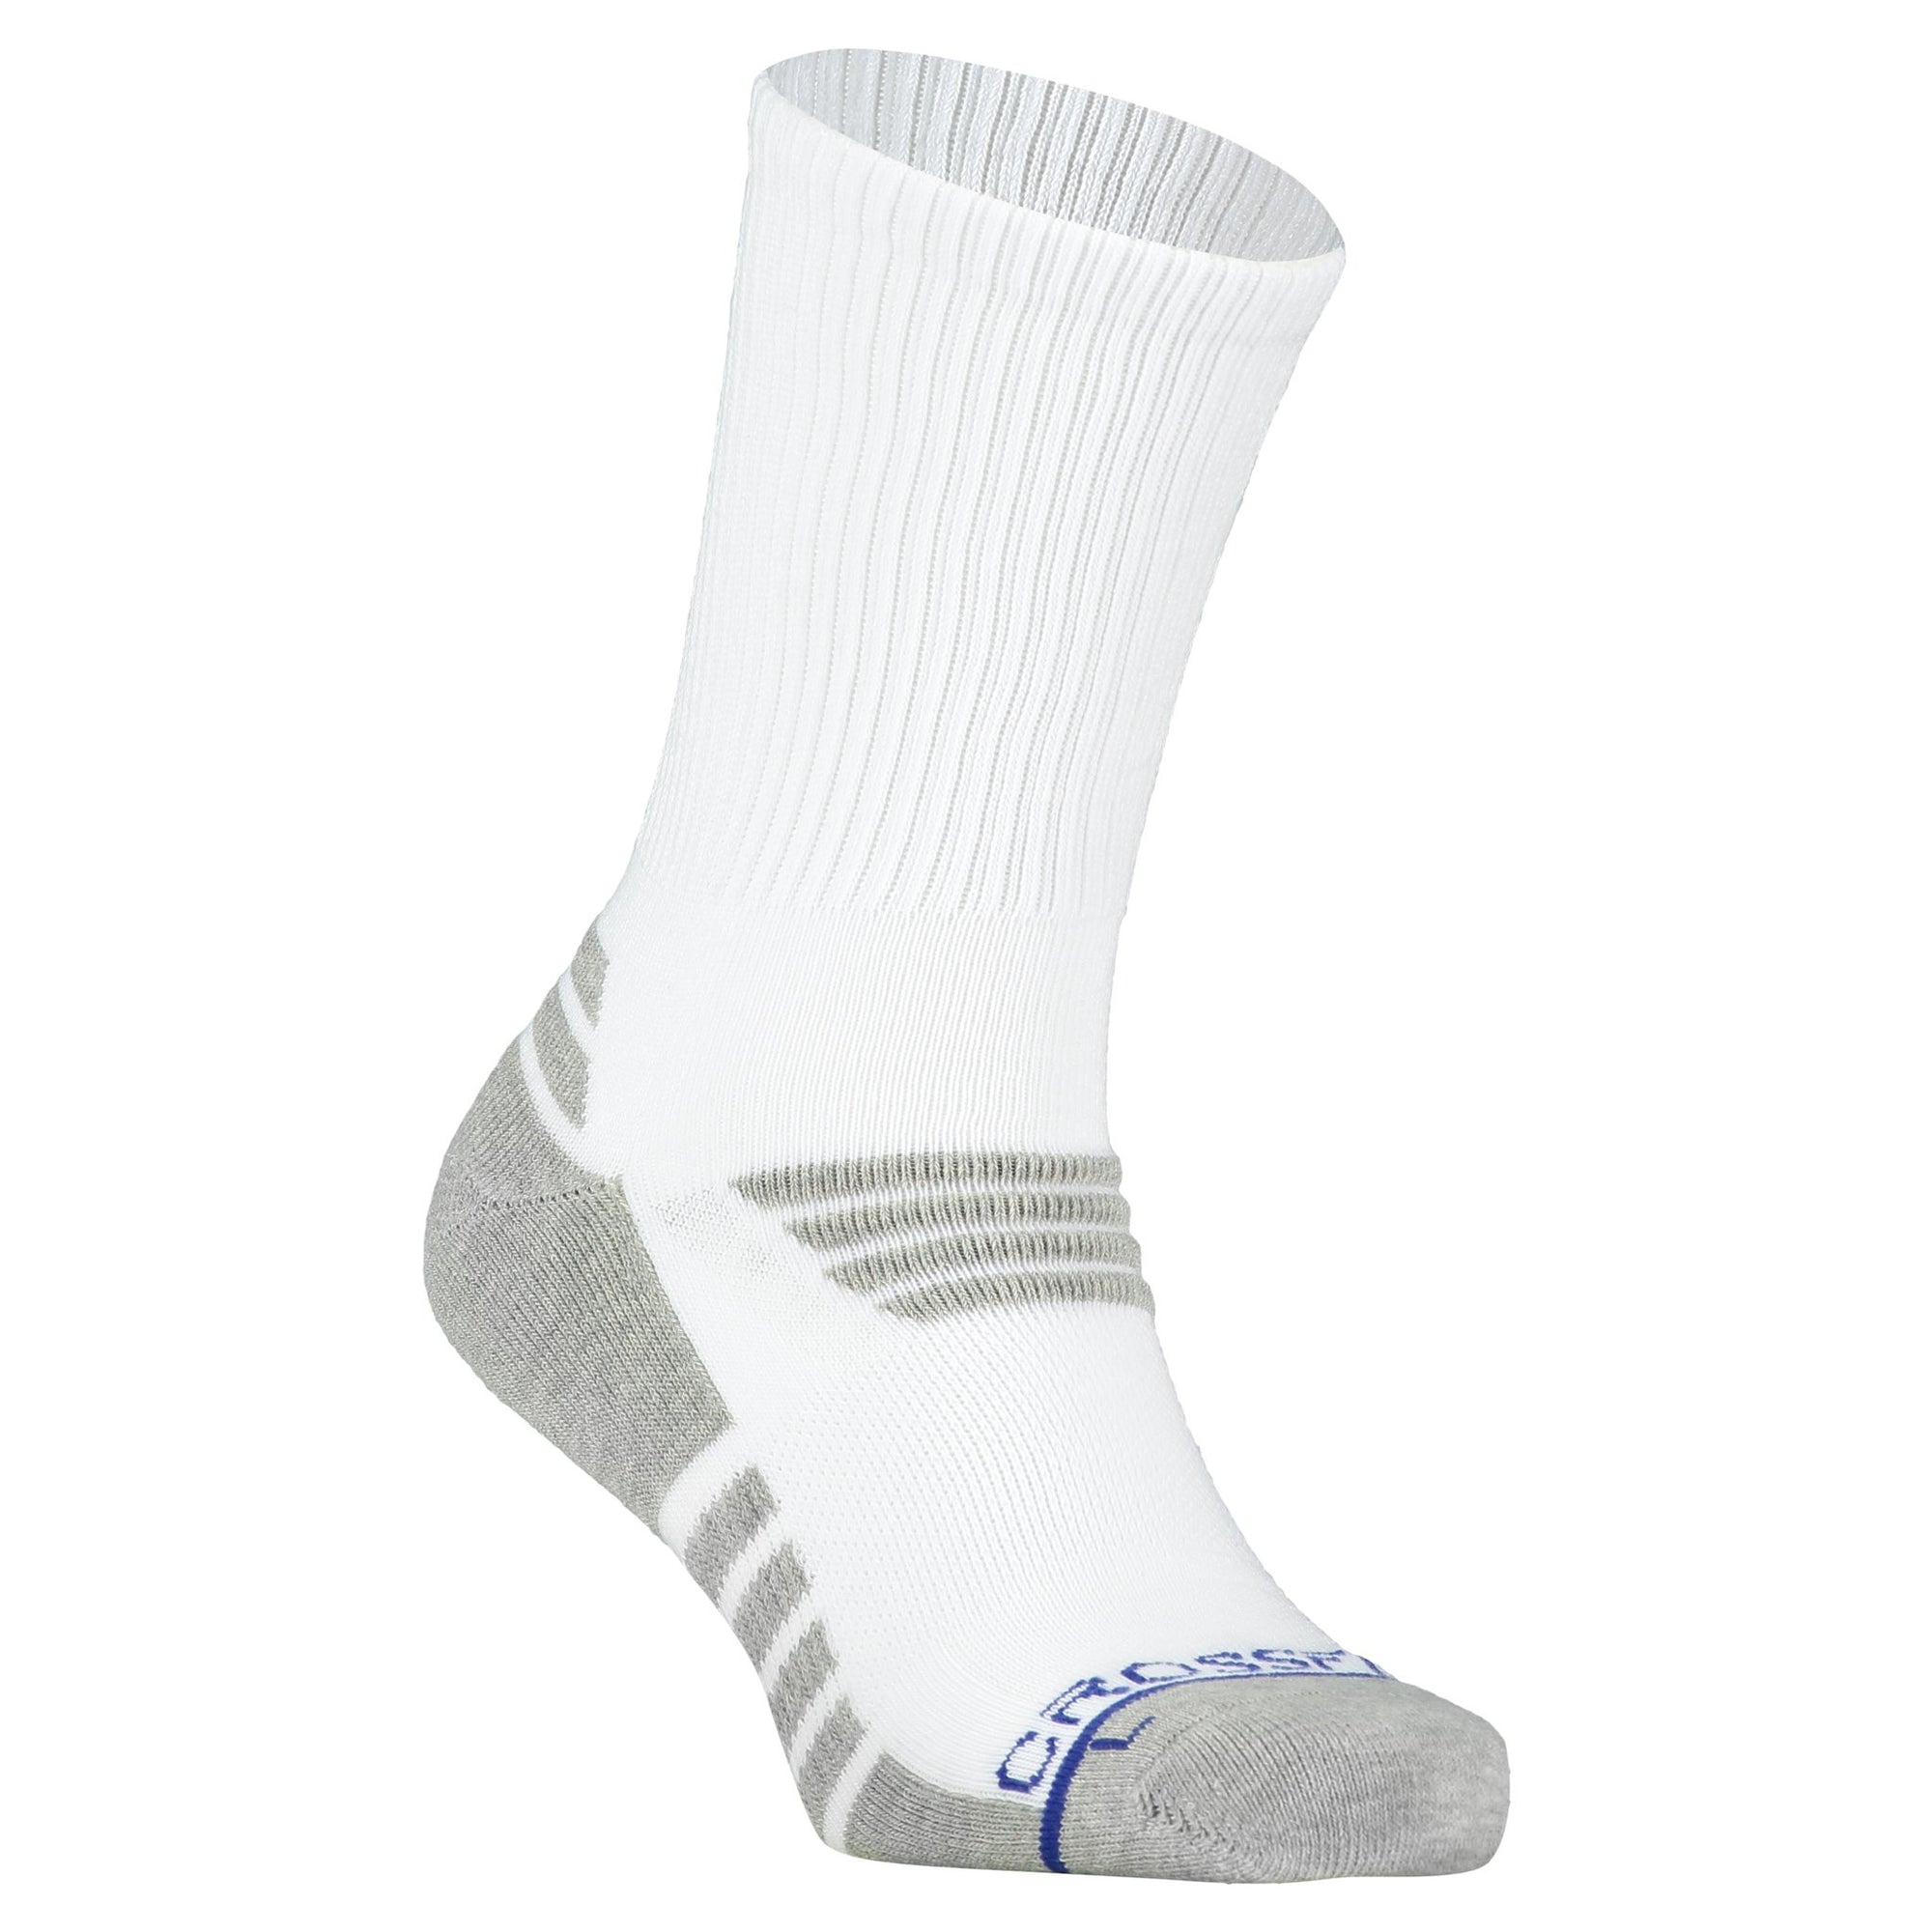 Crossfly men's Tempo Crew Socks in white / grey from the Performance series, featuring AirBeams and 180 Hold.